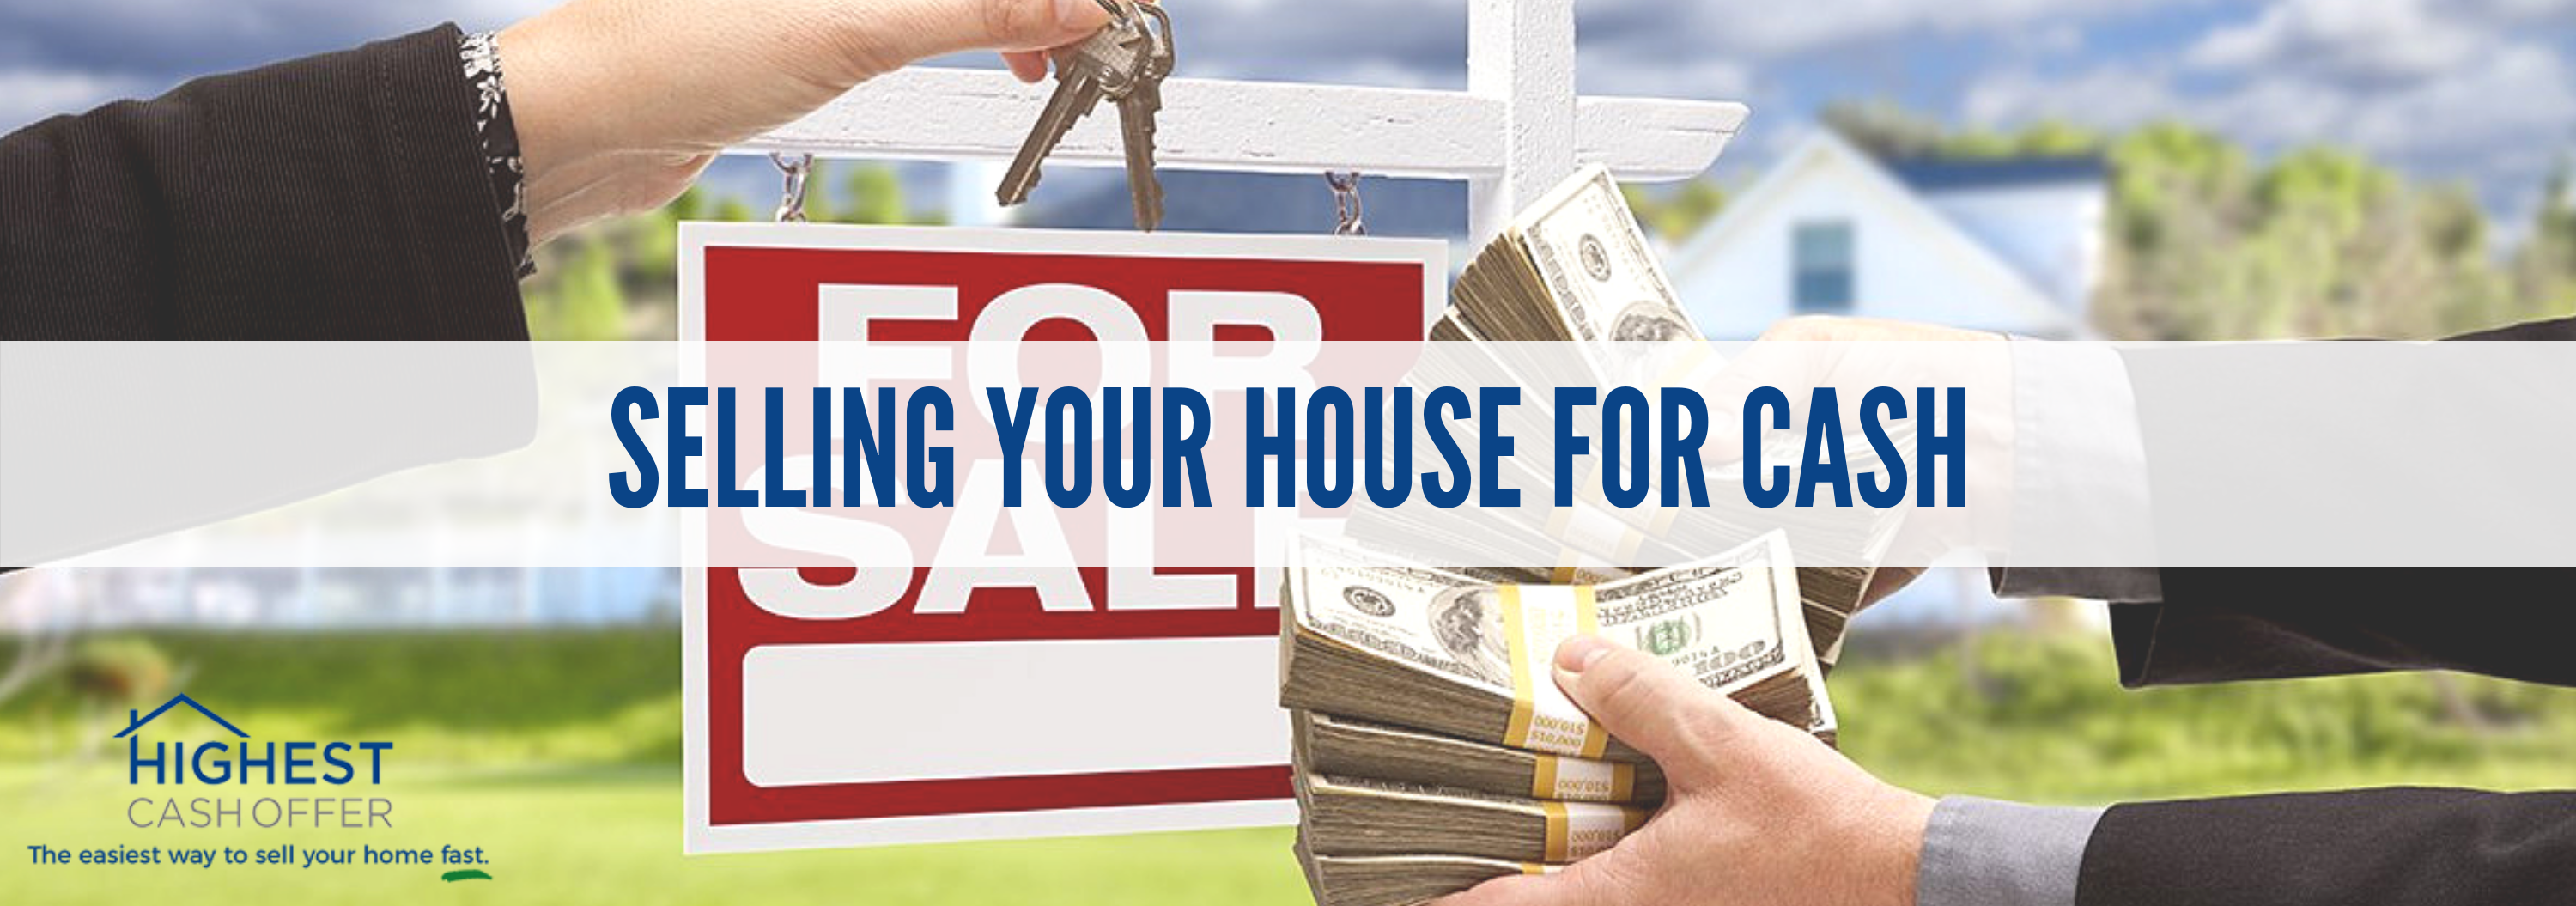 The Pros and Cons of Selling Your Property to CT Cash Homes VsTraditional  Real Estate Companies - We Buy Houses in Connecticut CT - Cash for Homes -  Sell My House